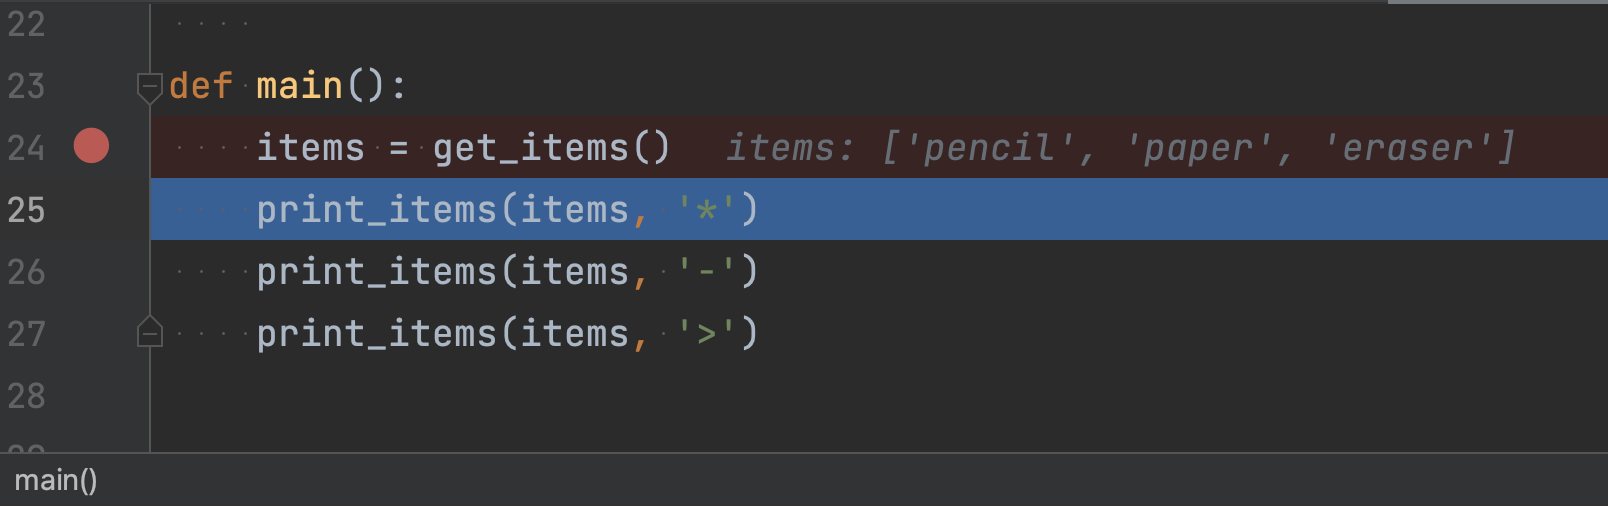 debugger shows the value of the items variable